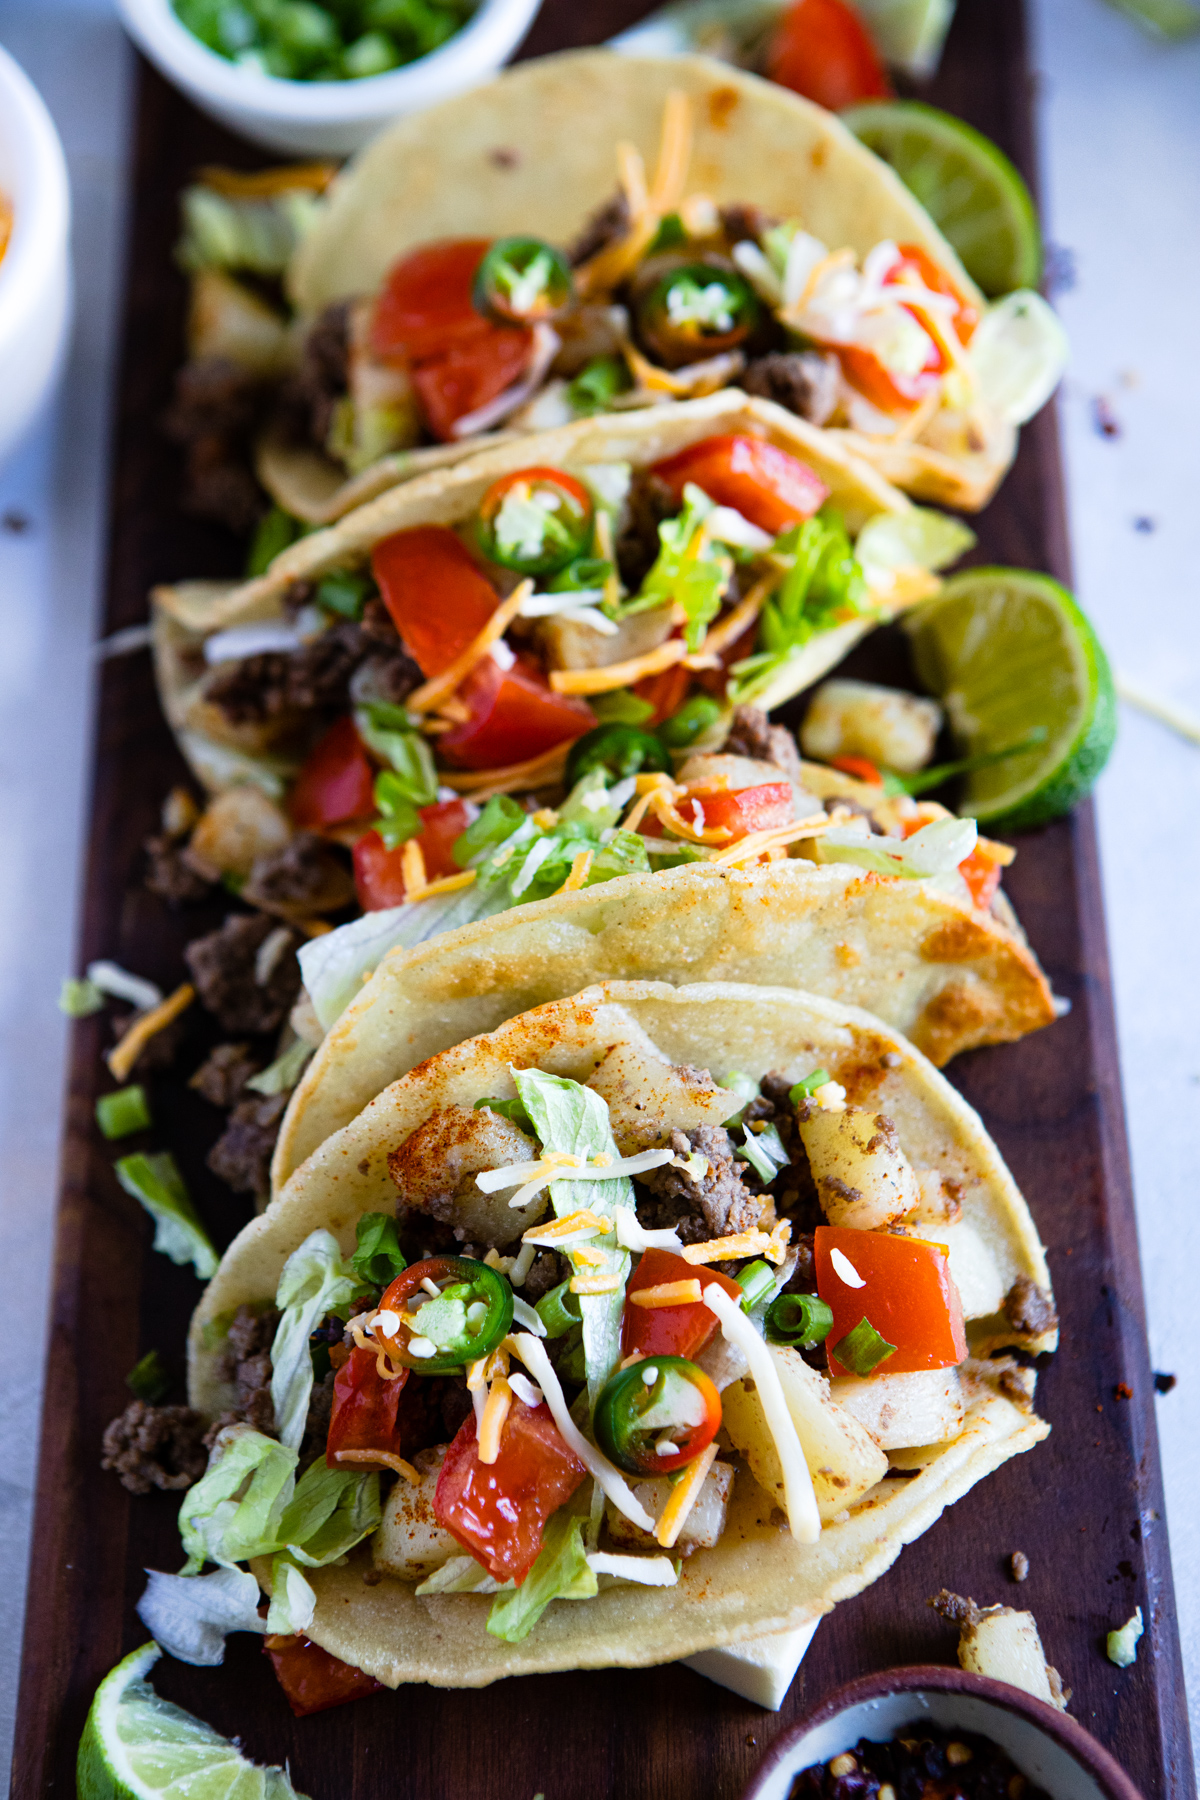 platter of tacos garnished with lettuce, tomatoes and jalapeno